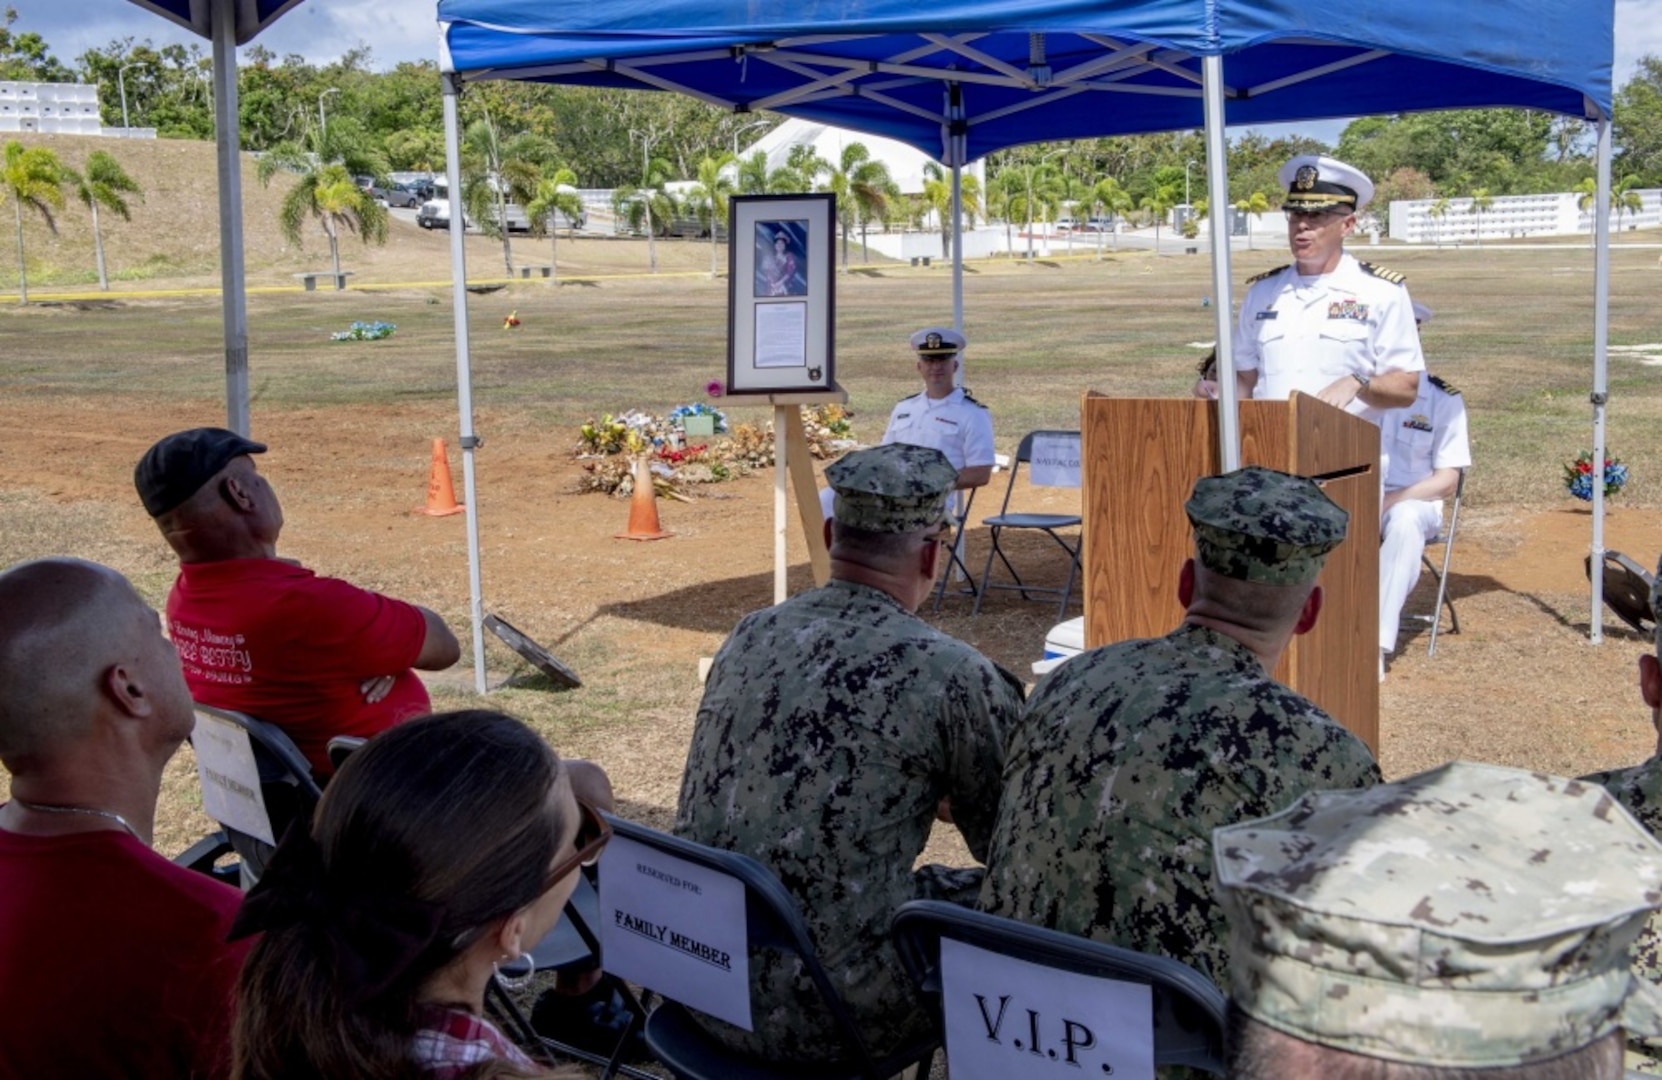 PITI, Guam (June 20, 2019) Capt. Dale Turner, commanding officer of Naval Facilities Engineering Command (NAVFAC) Marianas, speaks during the Seabee Betty Day memorial celebration. Seabee Betty died June 9, 2003 and was interred June 20, 2003. In 2004, the governor of Guam declared June 20 to be Seabee Betty Day to honor the more than 50 years of dedicated service to the Seabee community on Guam. (U.S. Navy photo by Mass Communication Specialist 2nd Class Kelsey L. Adams)